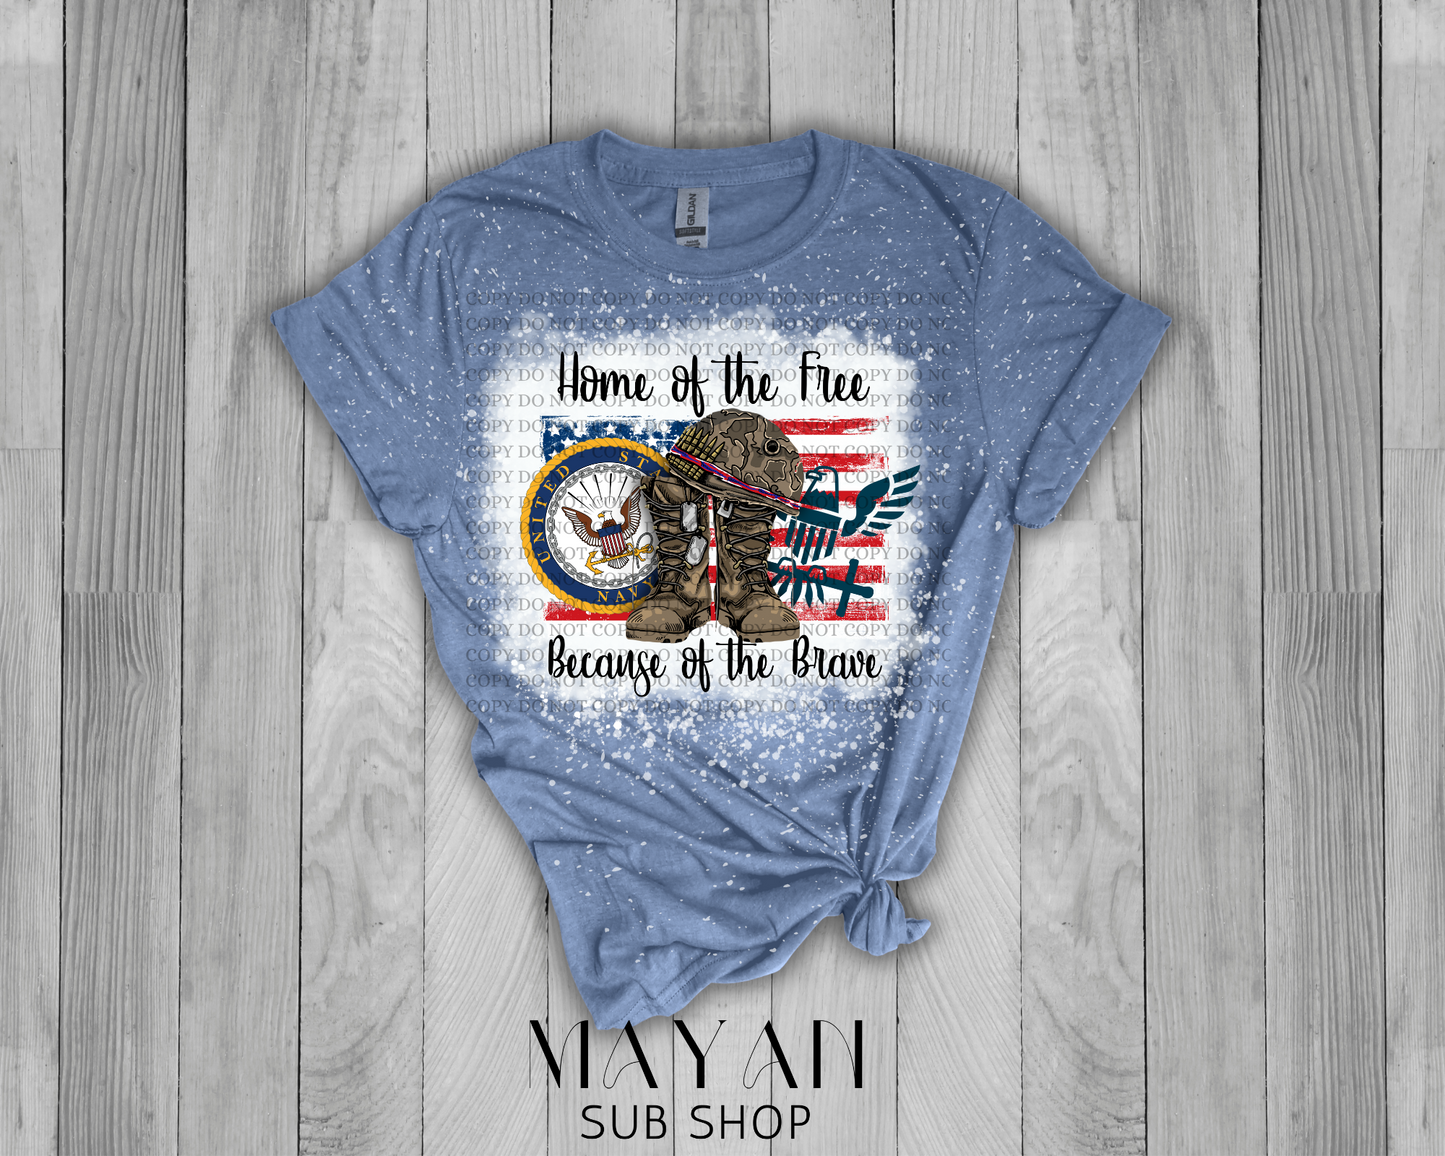 Home of the Free Navy Bleached Shirt - Mayan Sub Shop